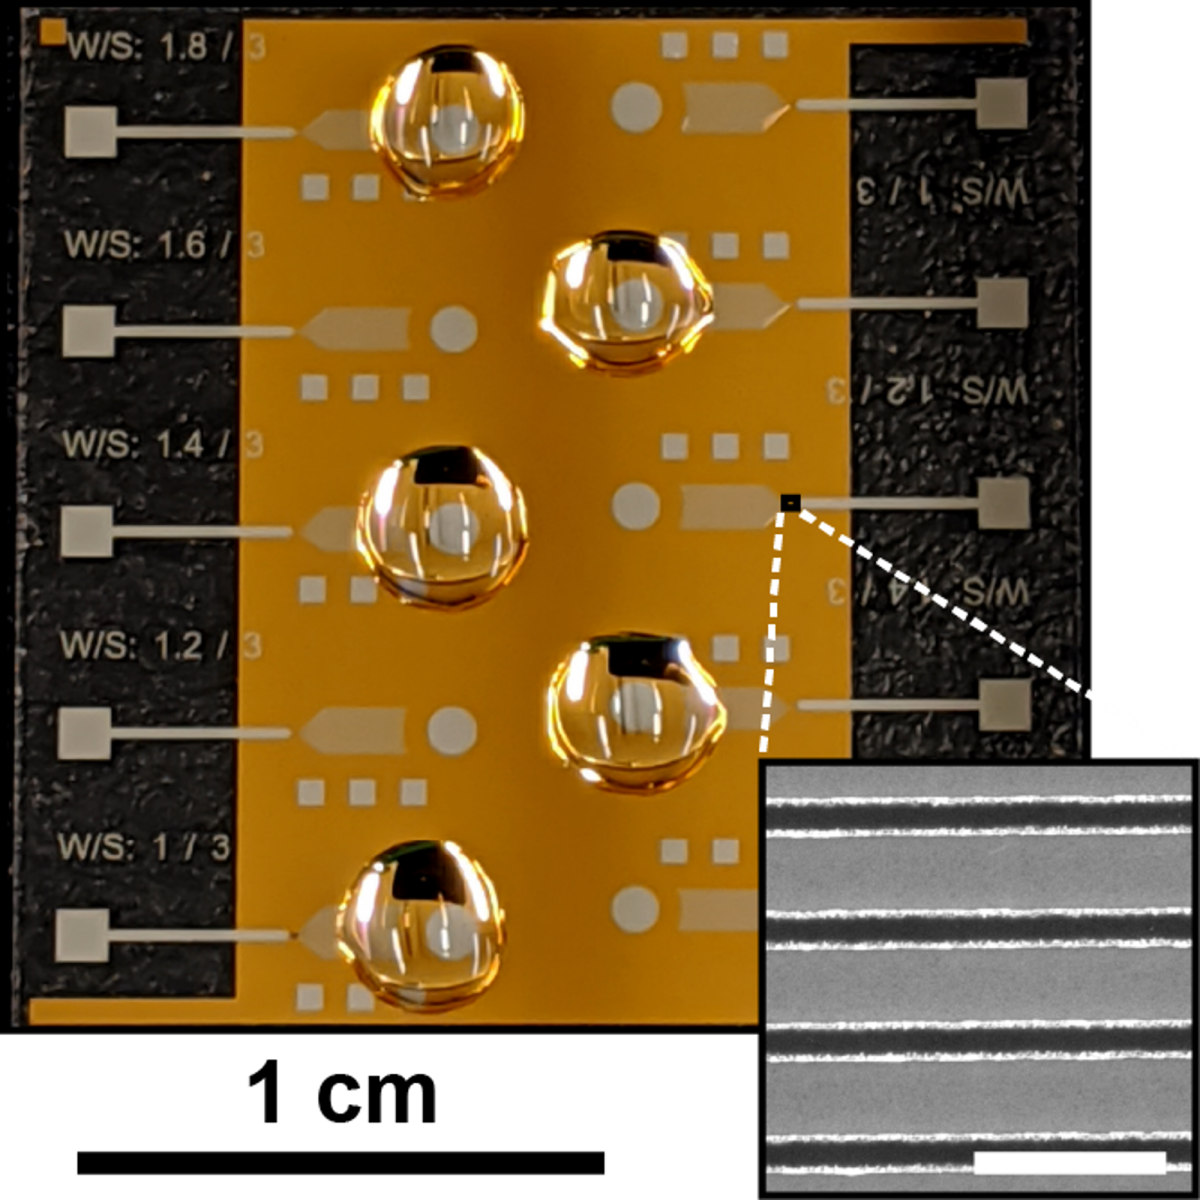 Diagnostic microchip with liquid droplets on the surface